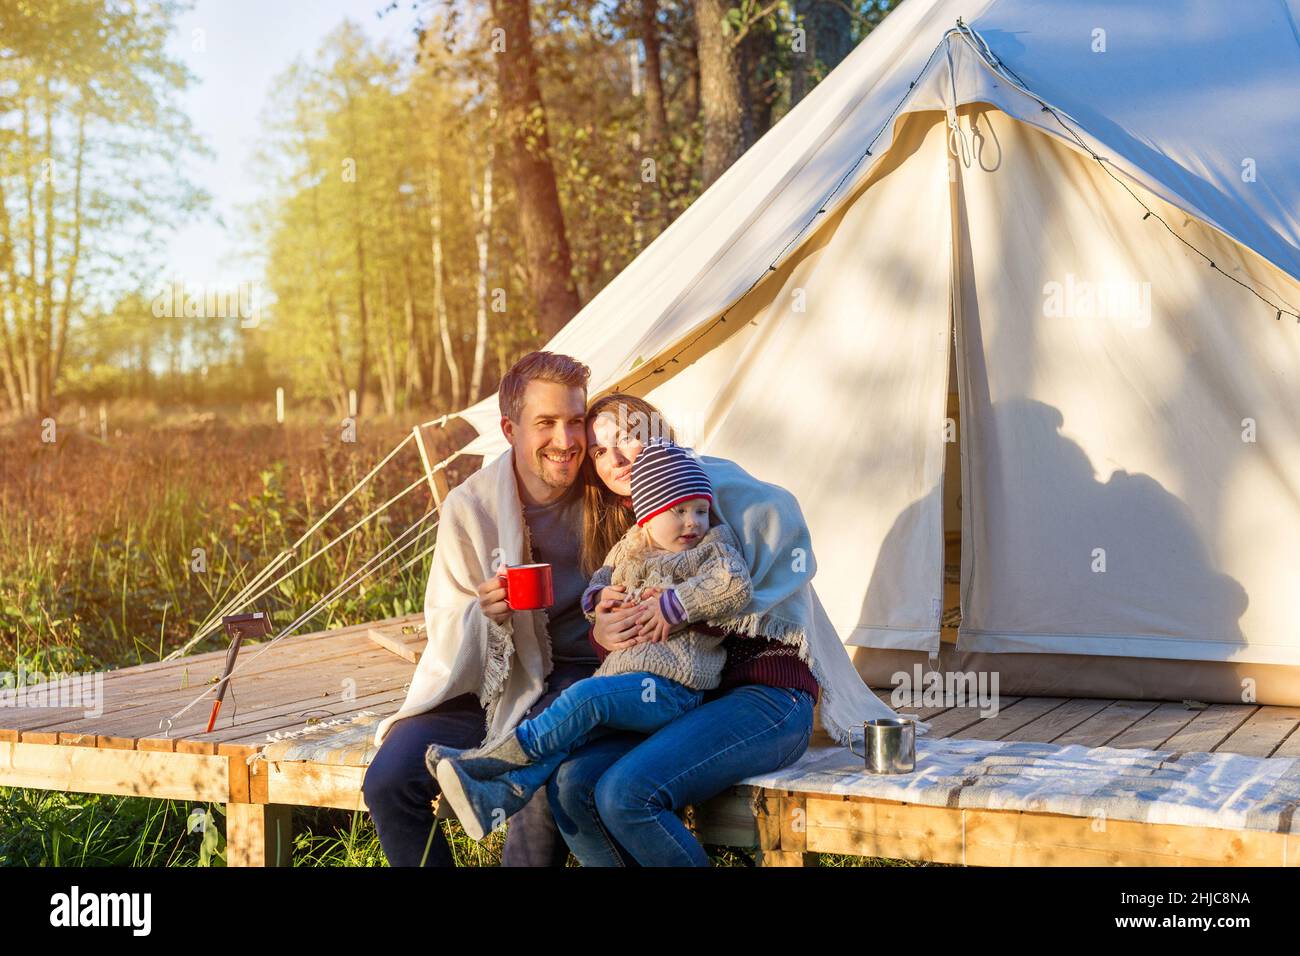 Happy young family wraps a blanket over themselves while sitting near canvas bell tent outdoors during sunset Stock Photo